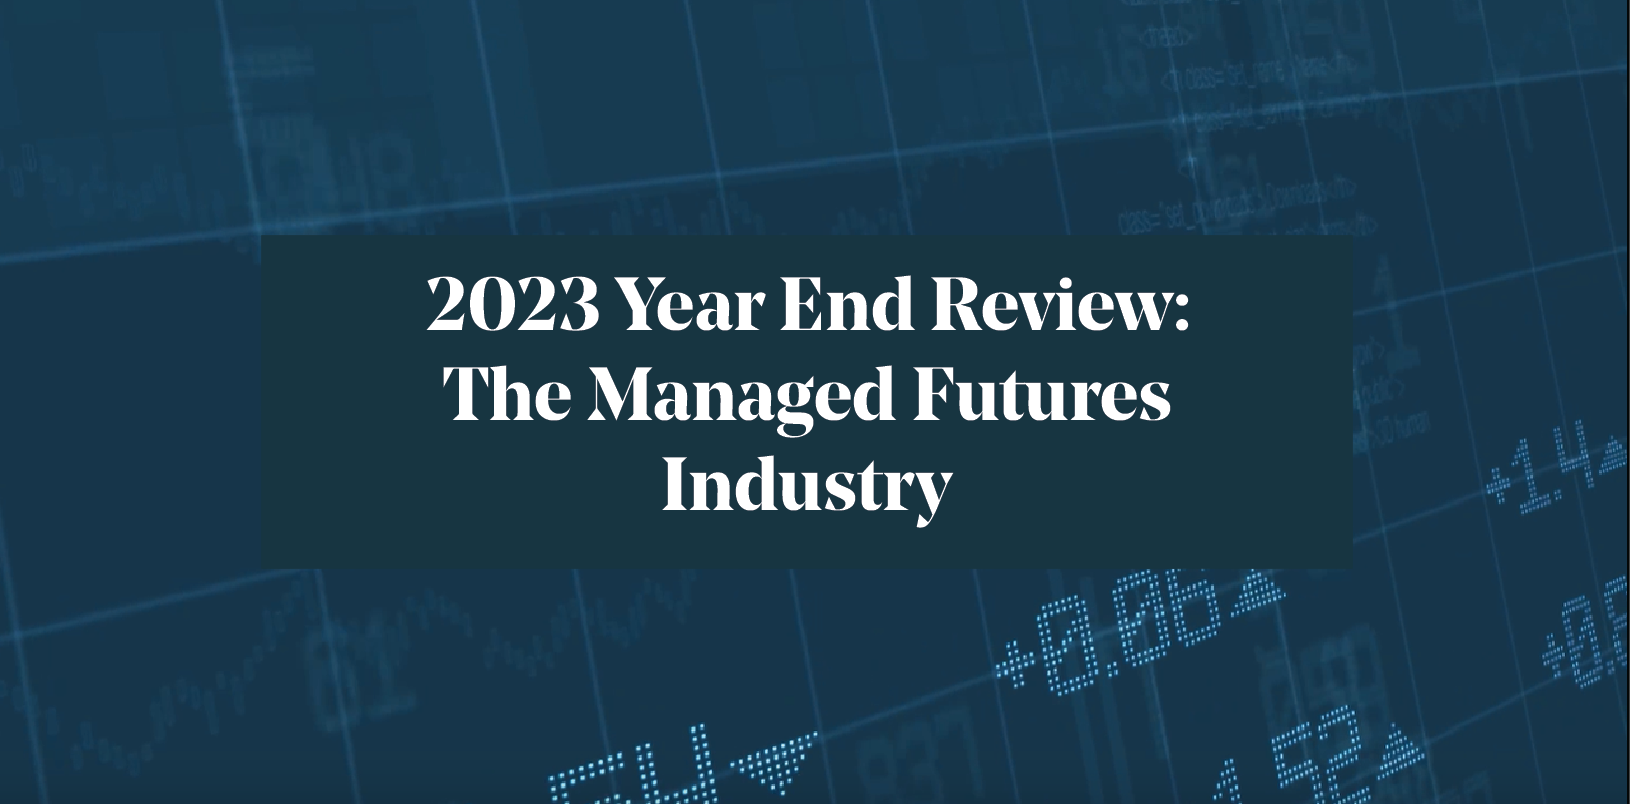 2023 Annual Review